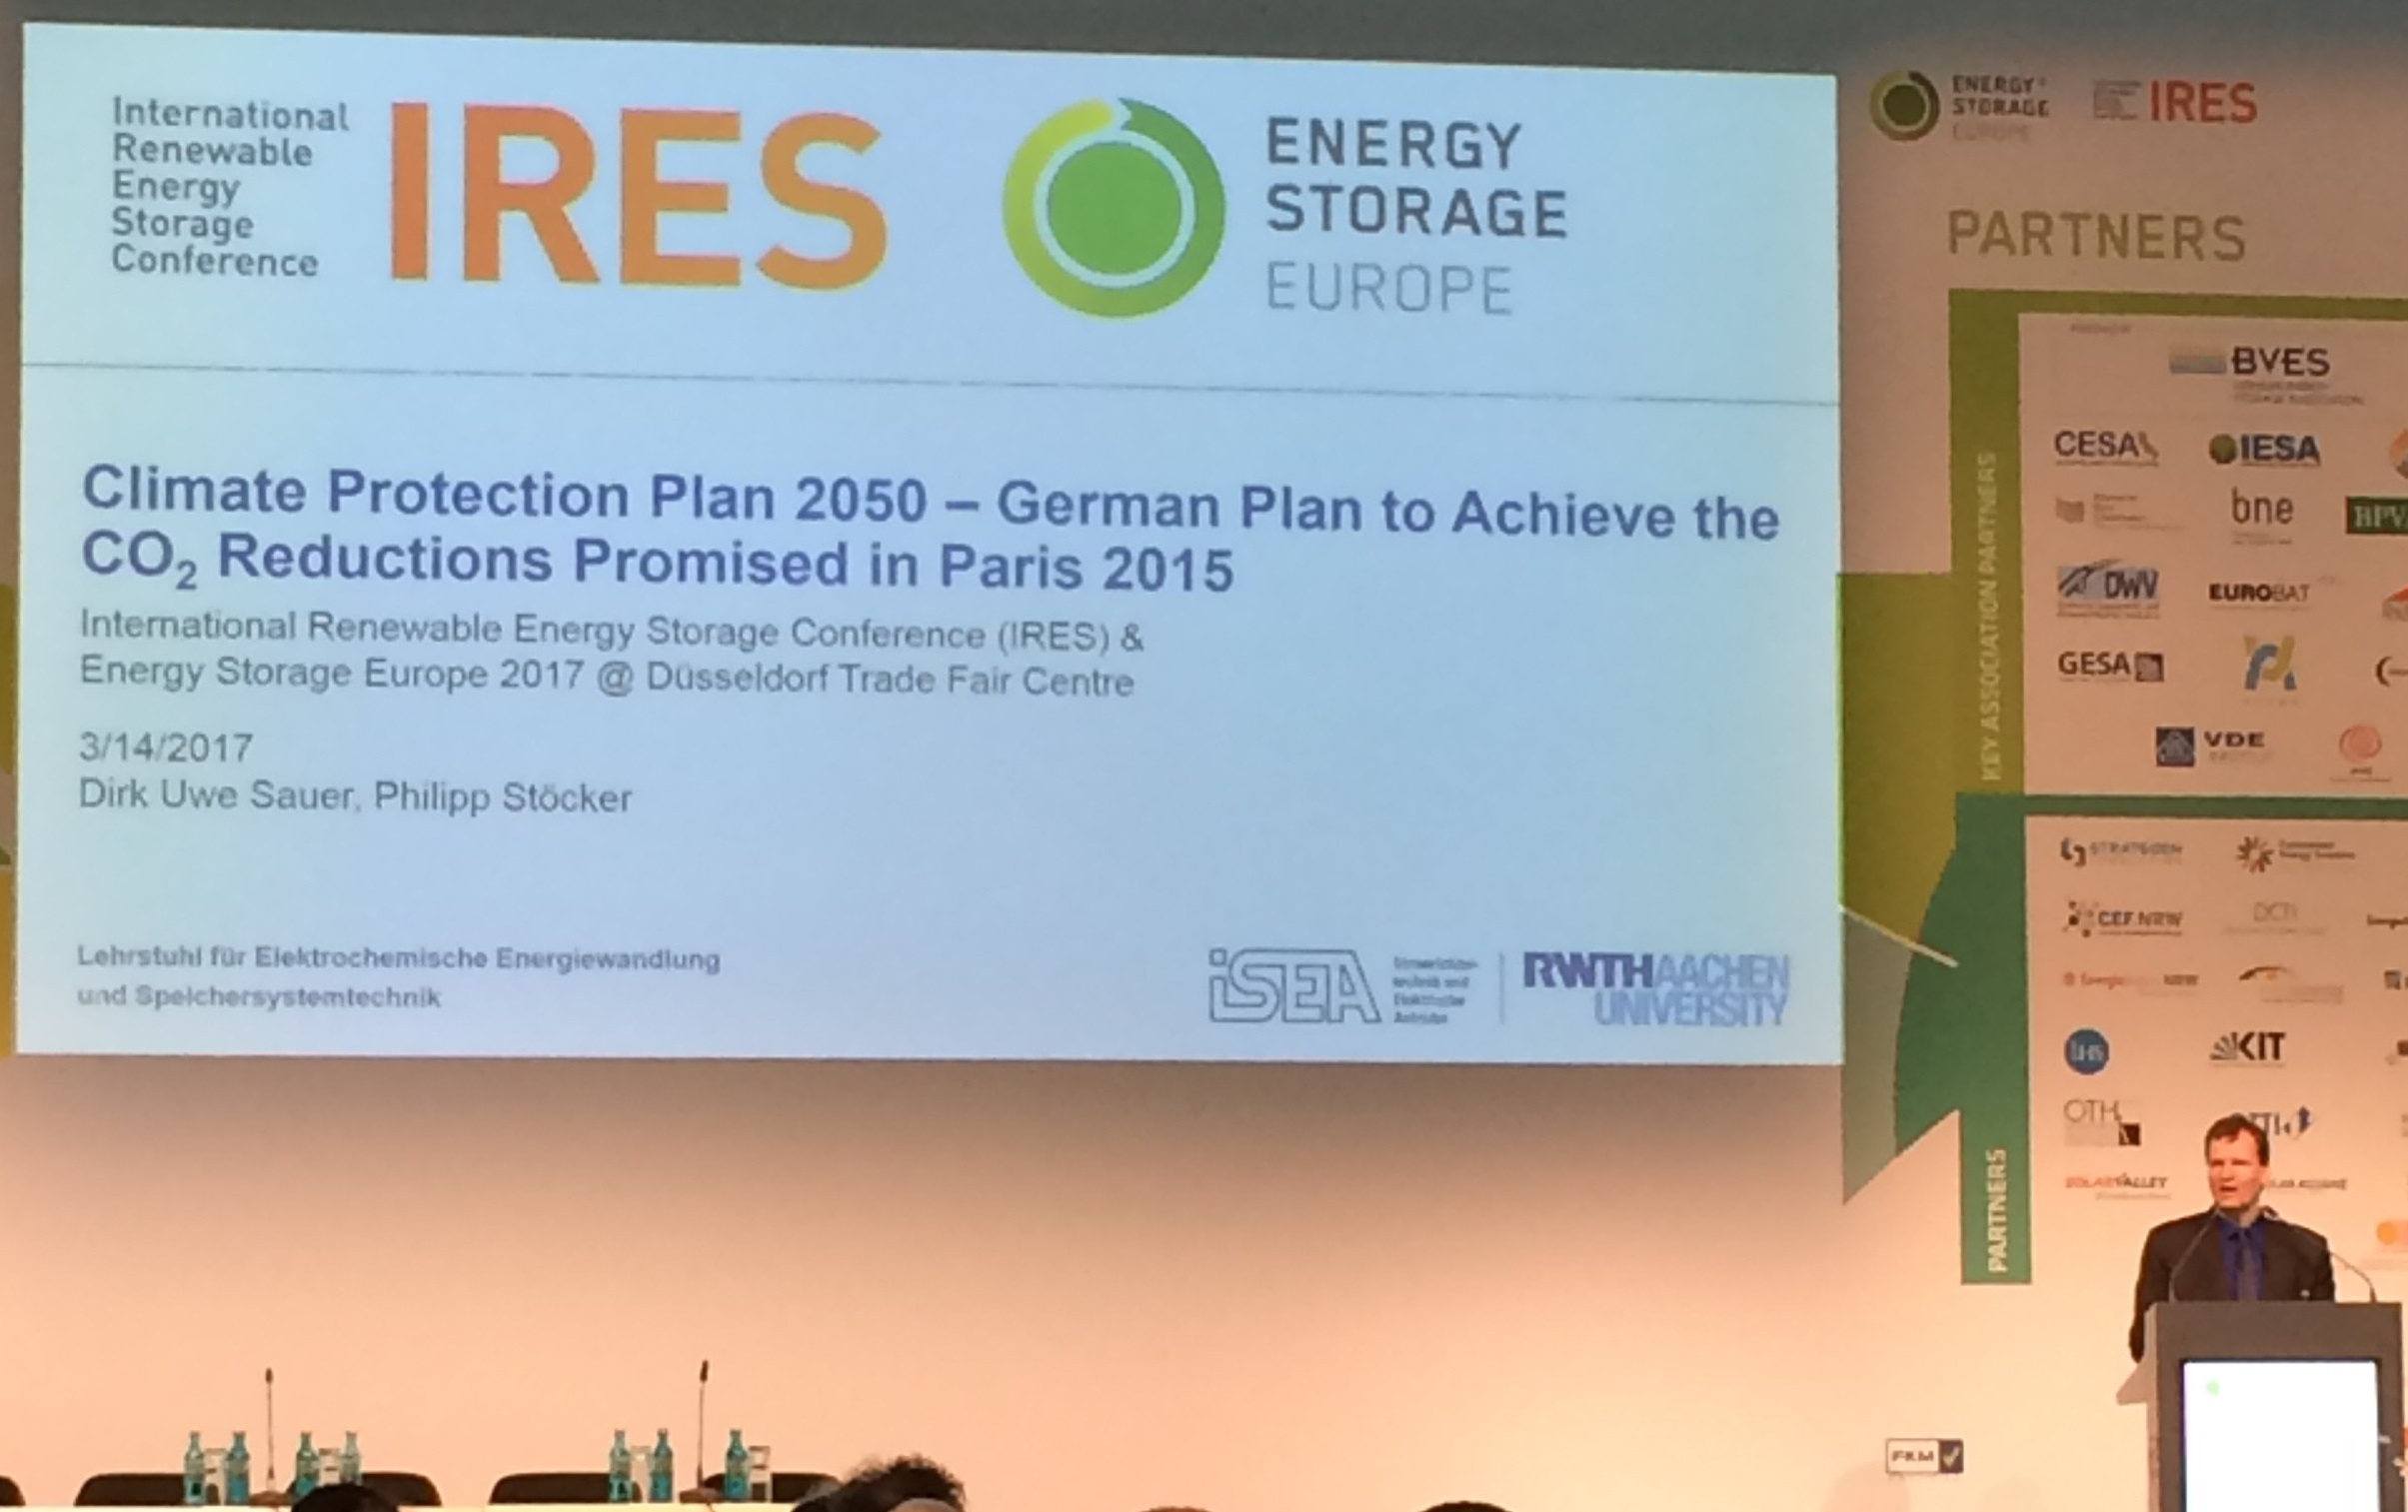 Prof Dirk Uwe Sauer of RWTH Aachen University speaking on Germany's emissions reduction goals. Image: Andy Colthorpe.